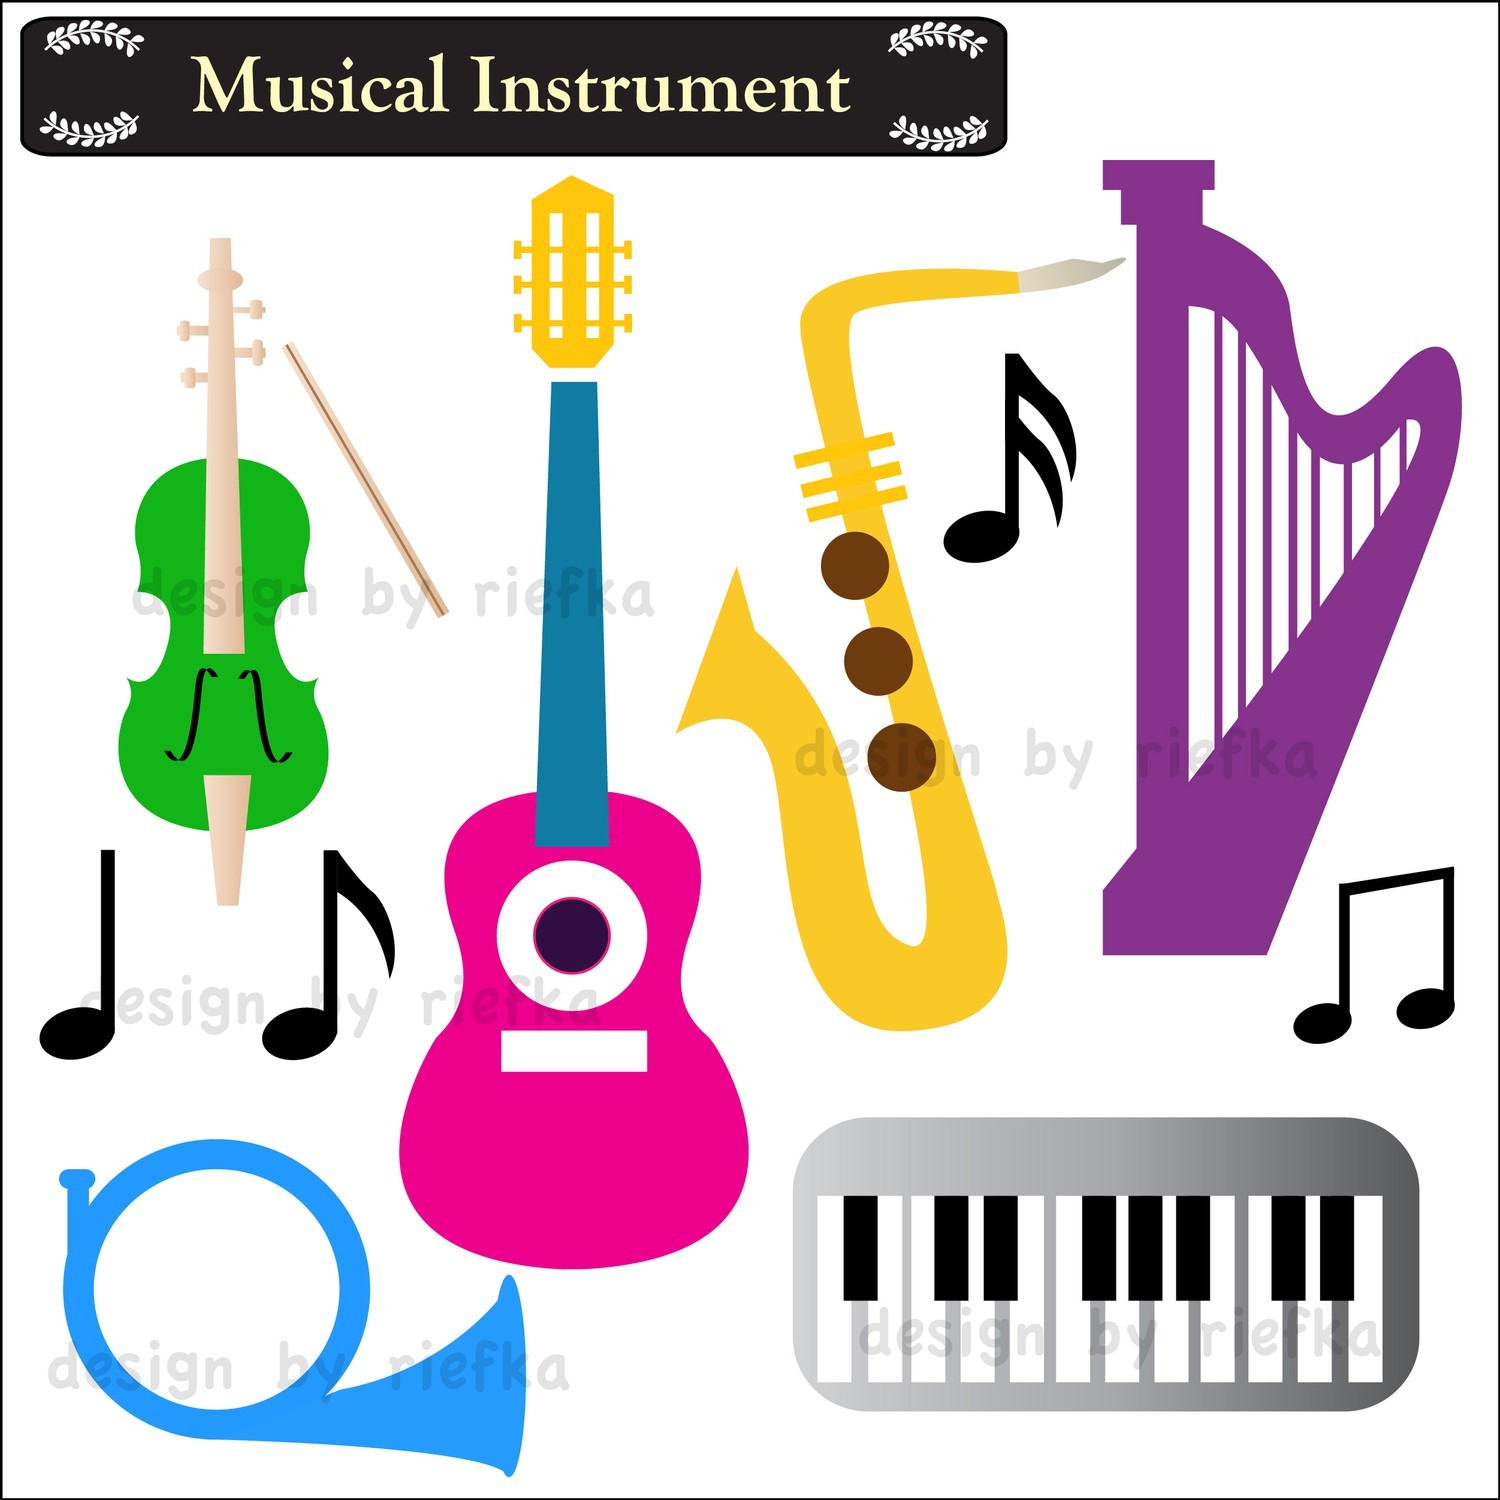 Musical instruments and . mus